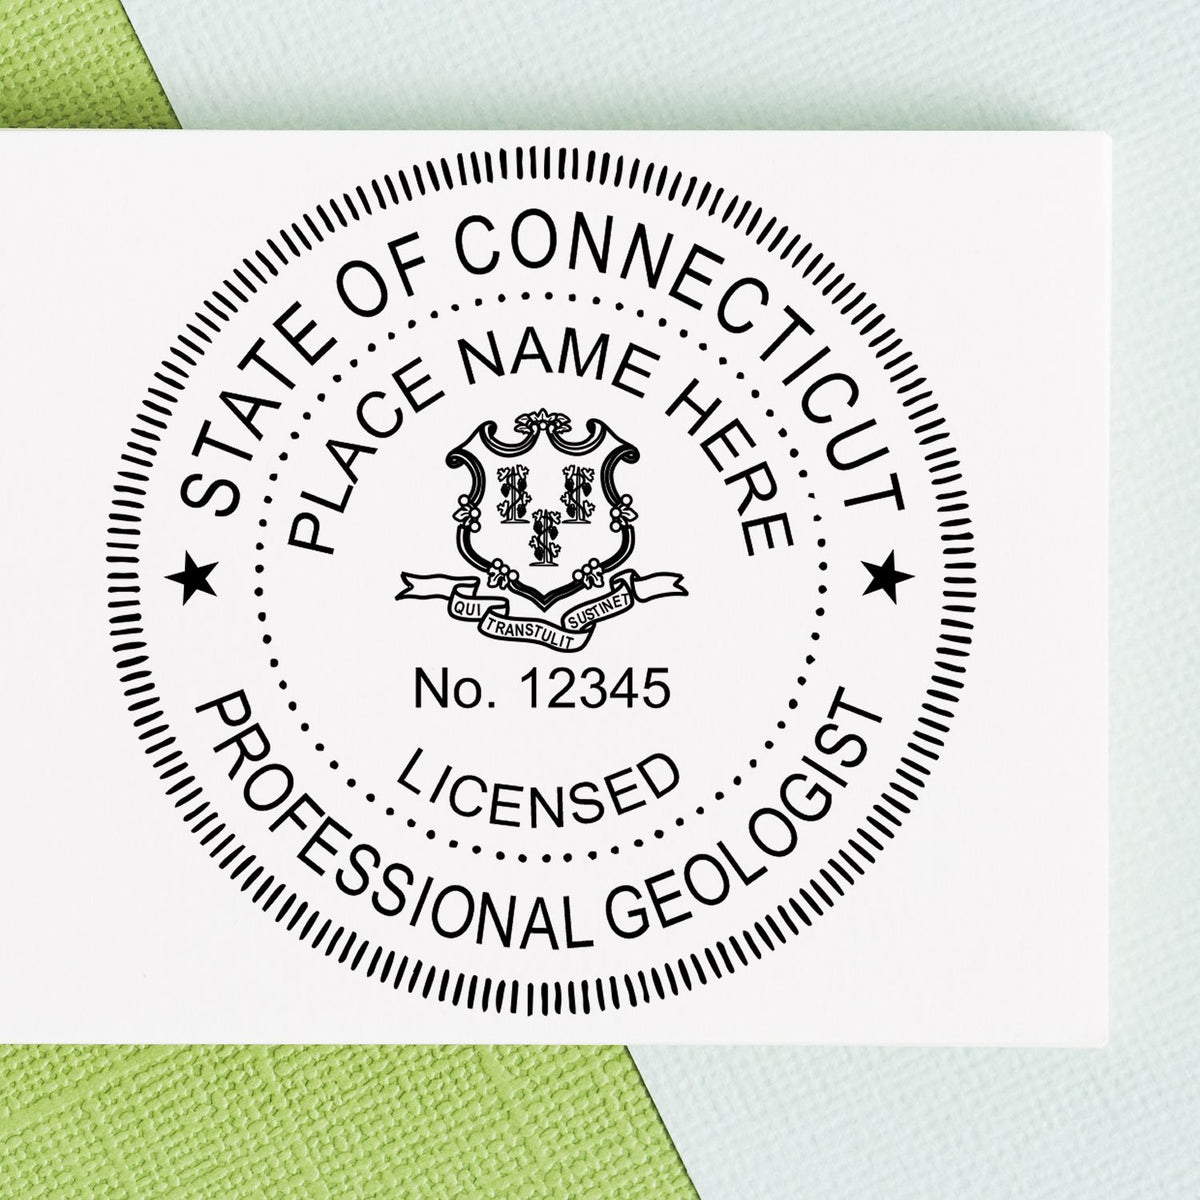 This paper is stamped with a sample imprint of the Premium MaxLight Pre-Inked Connecticut Geology Stamp, signifying its quality and reliability.